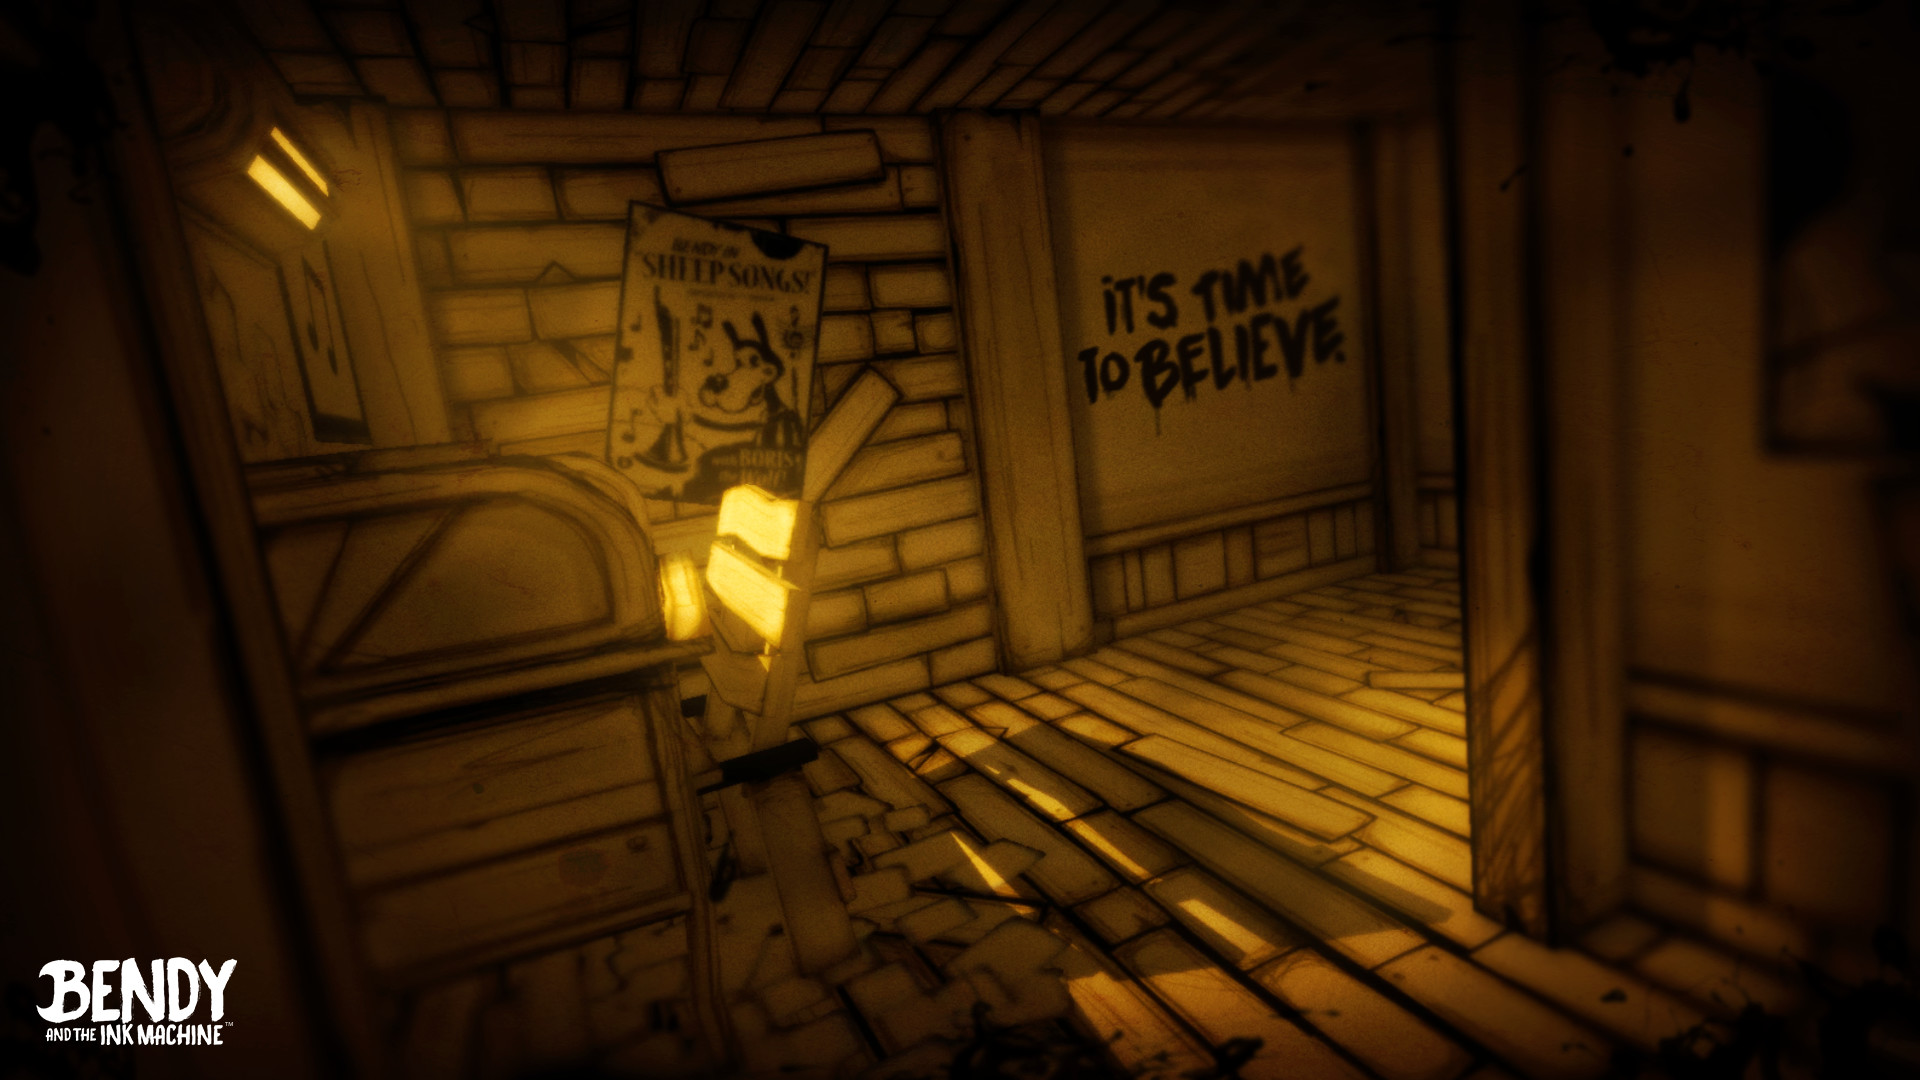 Bendy And The Ink Machine 2 Chapter Bendy and the Ink Machine Chapter 2 Torrent Download - CroTorrents